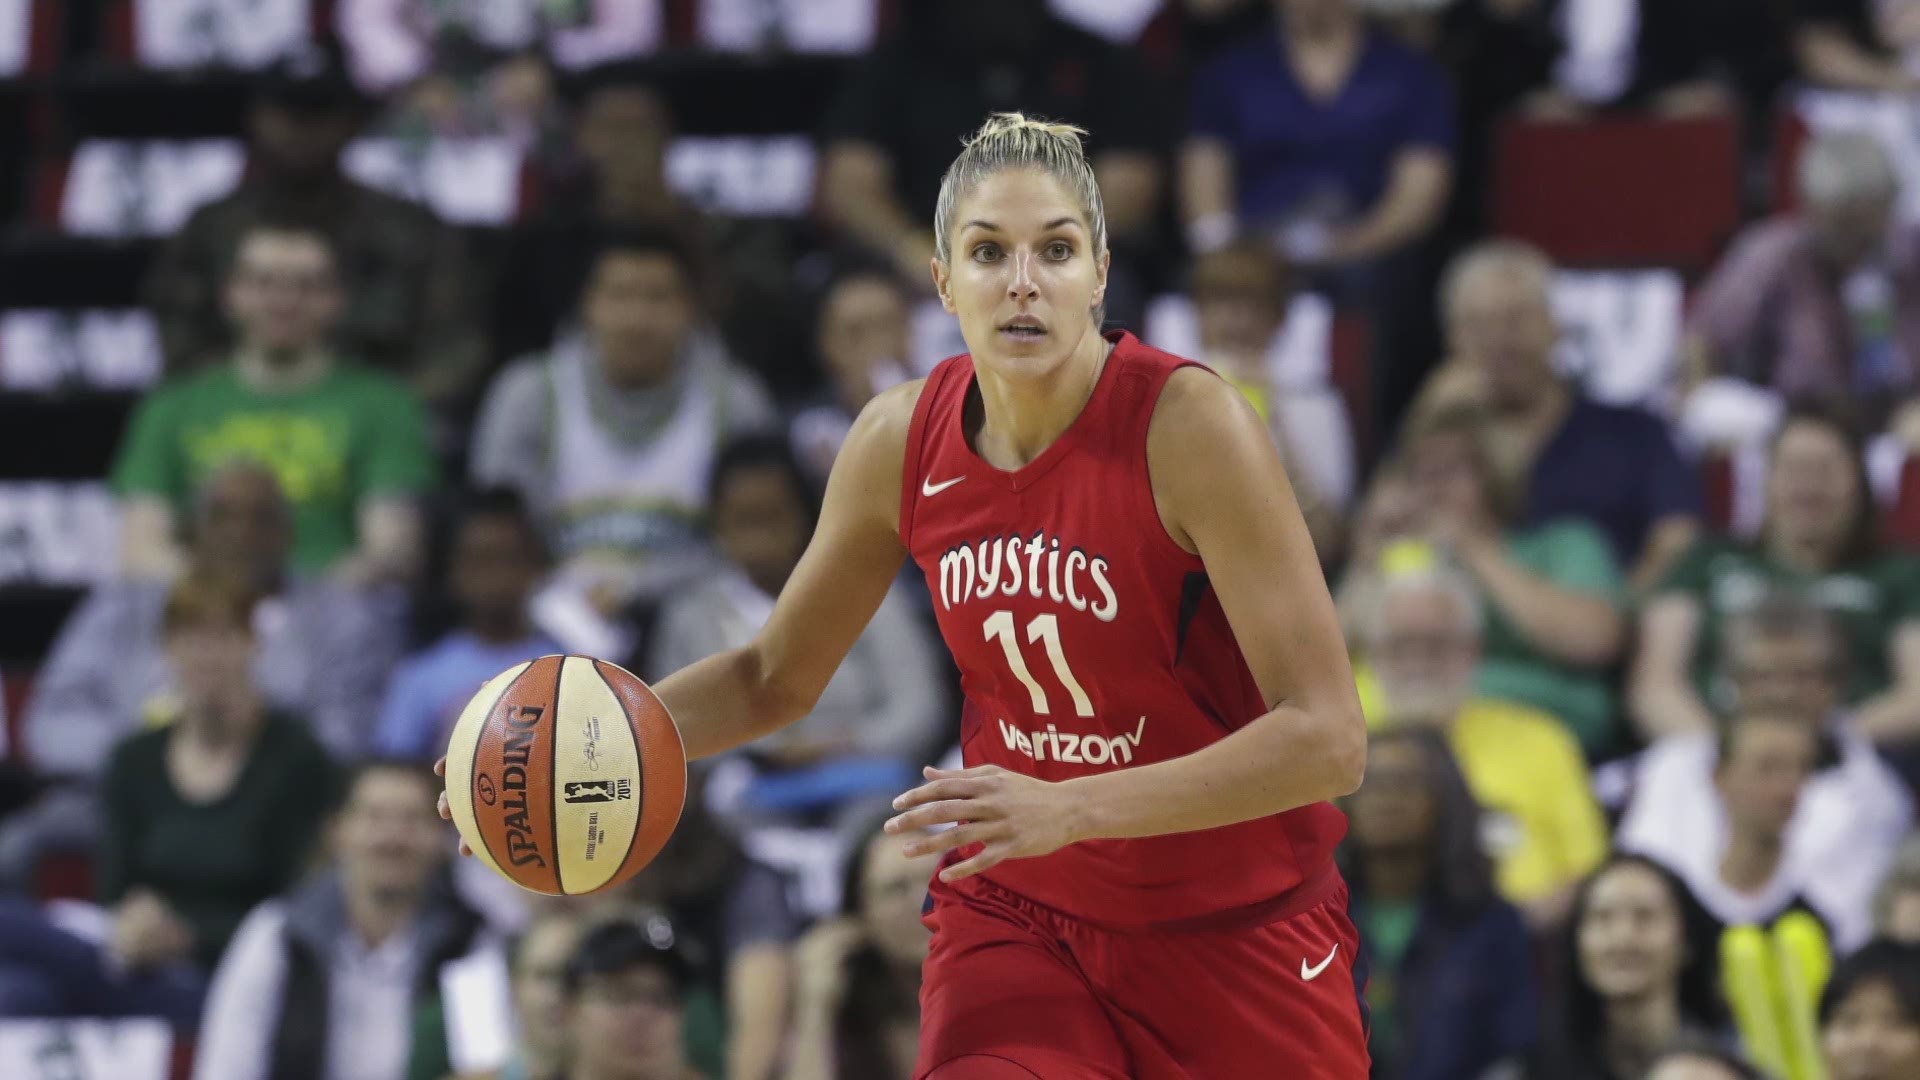 The Mystics Elena Delle Donne just completed a season the WNBA has never seen before. Not only has she done something no WNBA player has ever accomplished, but only eight men in history have ever done it.